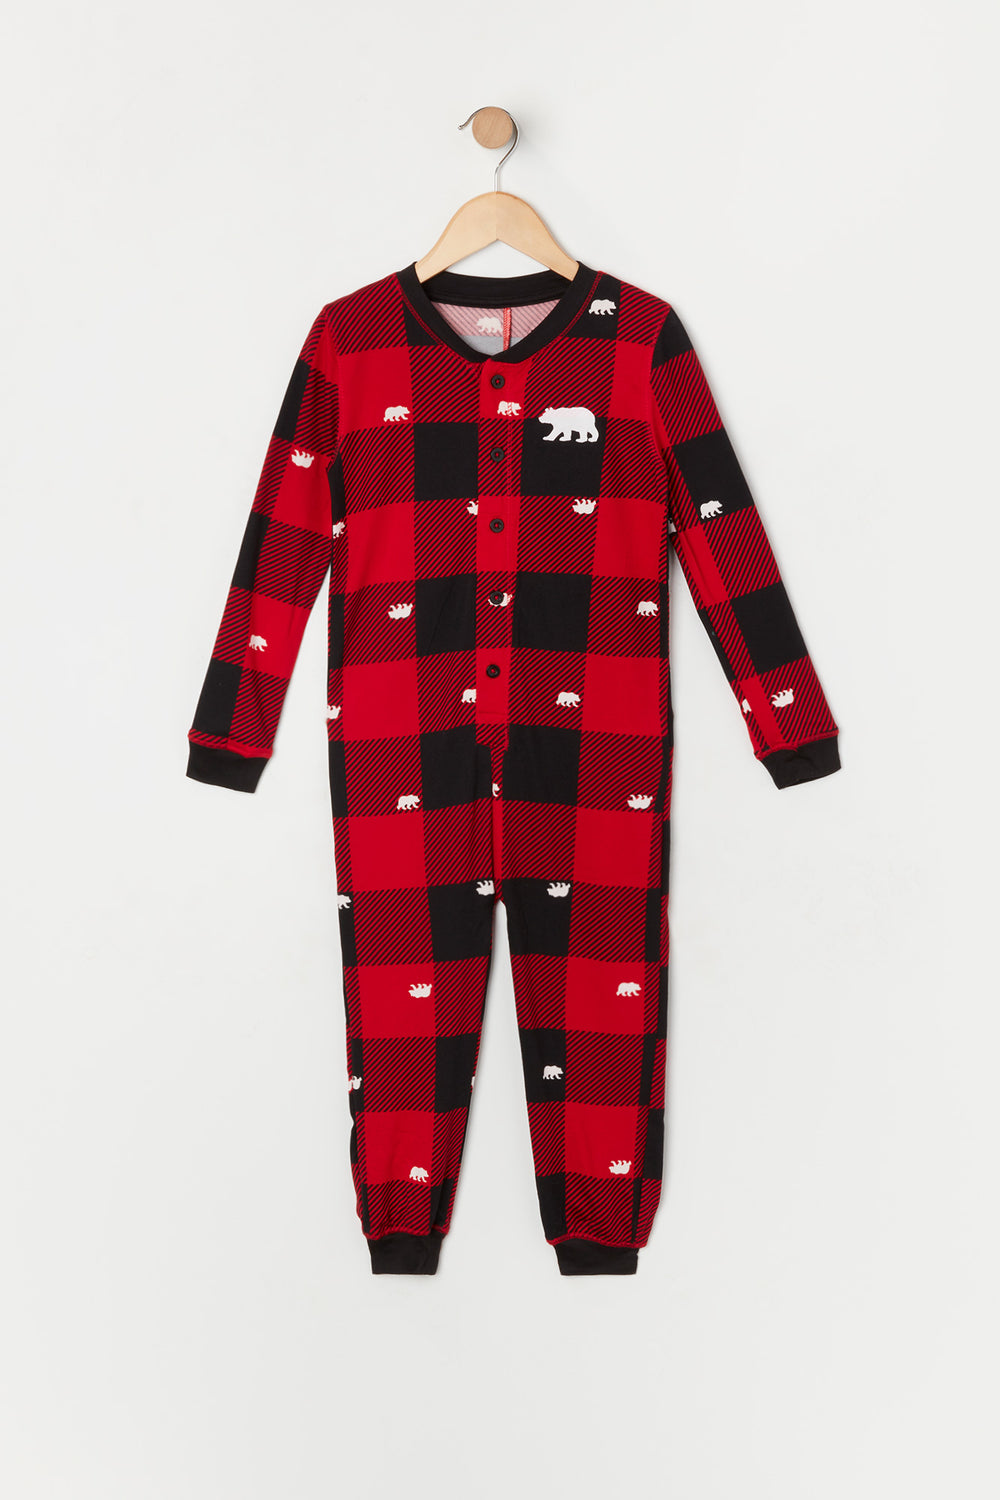 Toddler Matching the Family Bear Onesie Toddler Matching the Family Bear Onesie 1